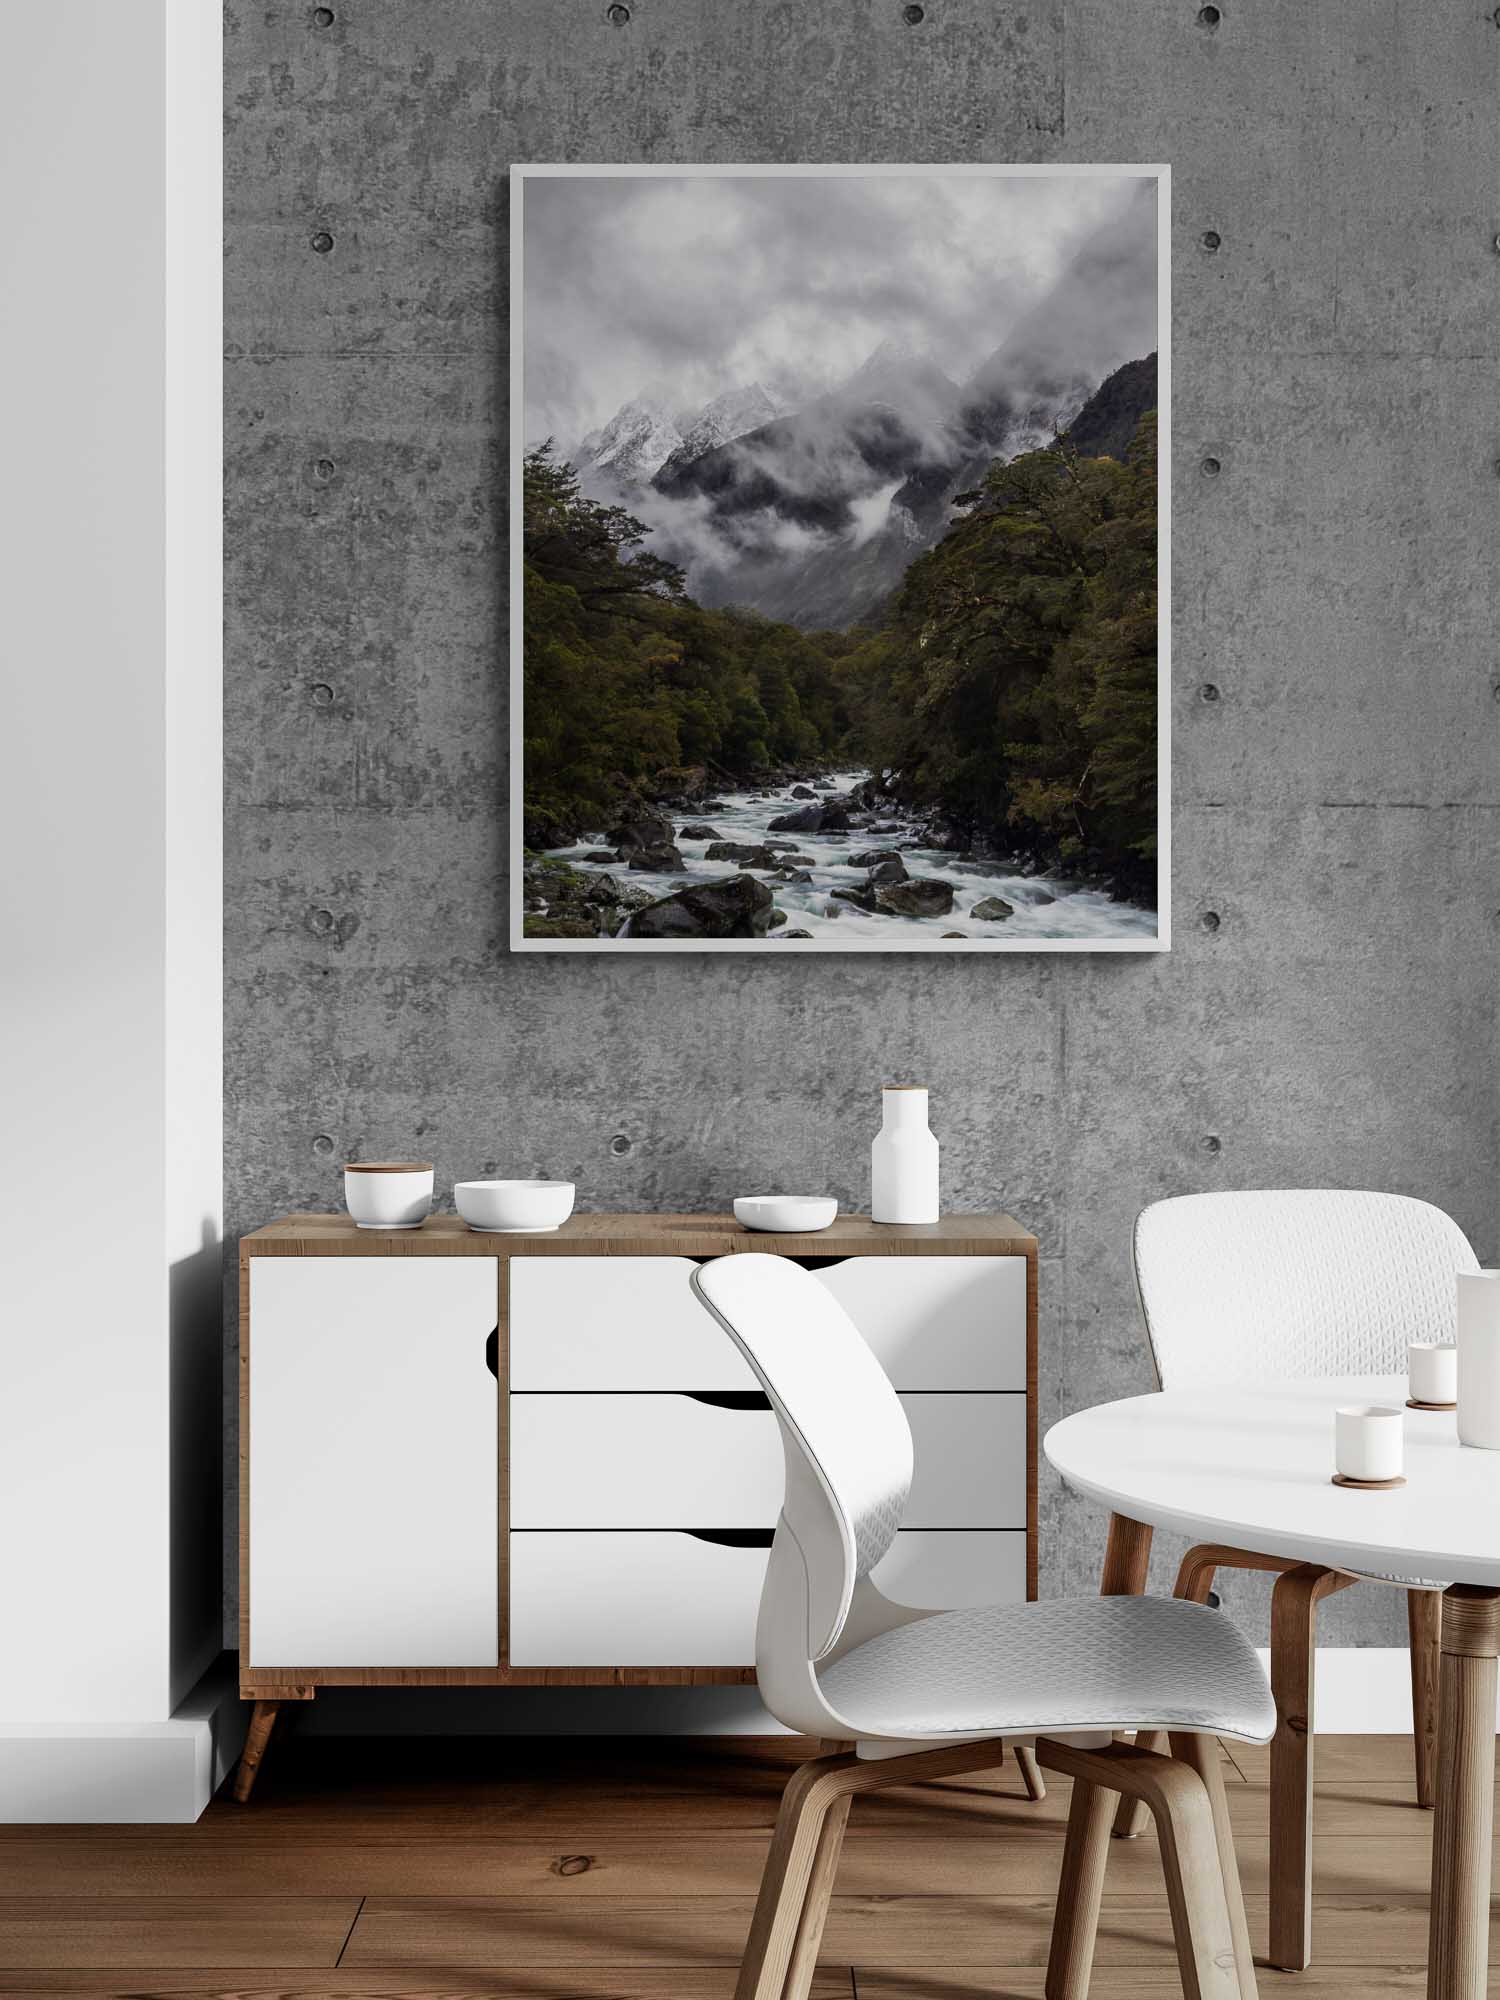 A powerful river cuts through a verdant forest with snow-covered mountains enshrouded in mist in the background at Milford Sound, New Zealand. Frame on a living Room